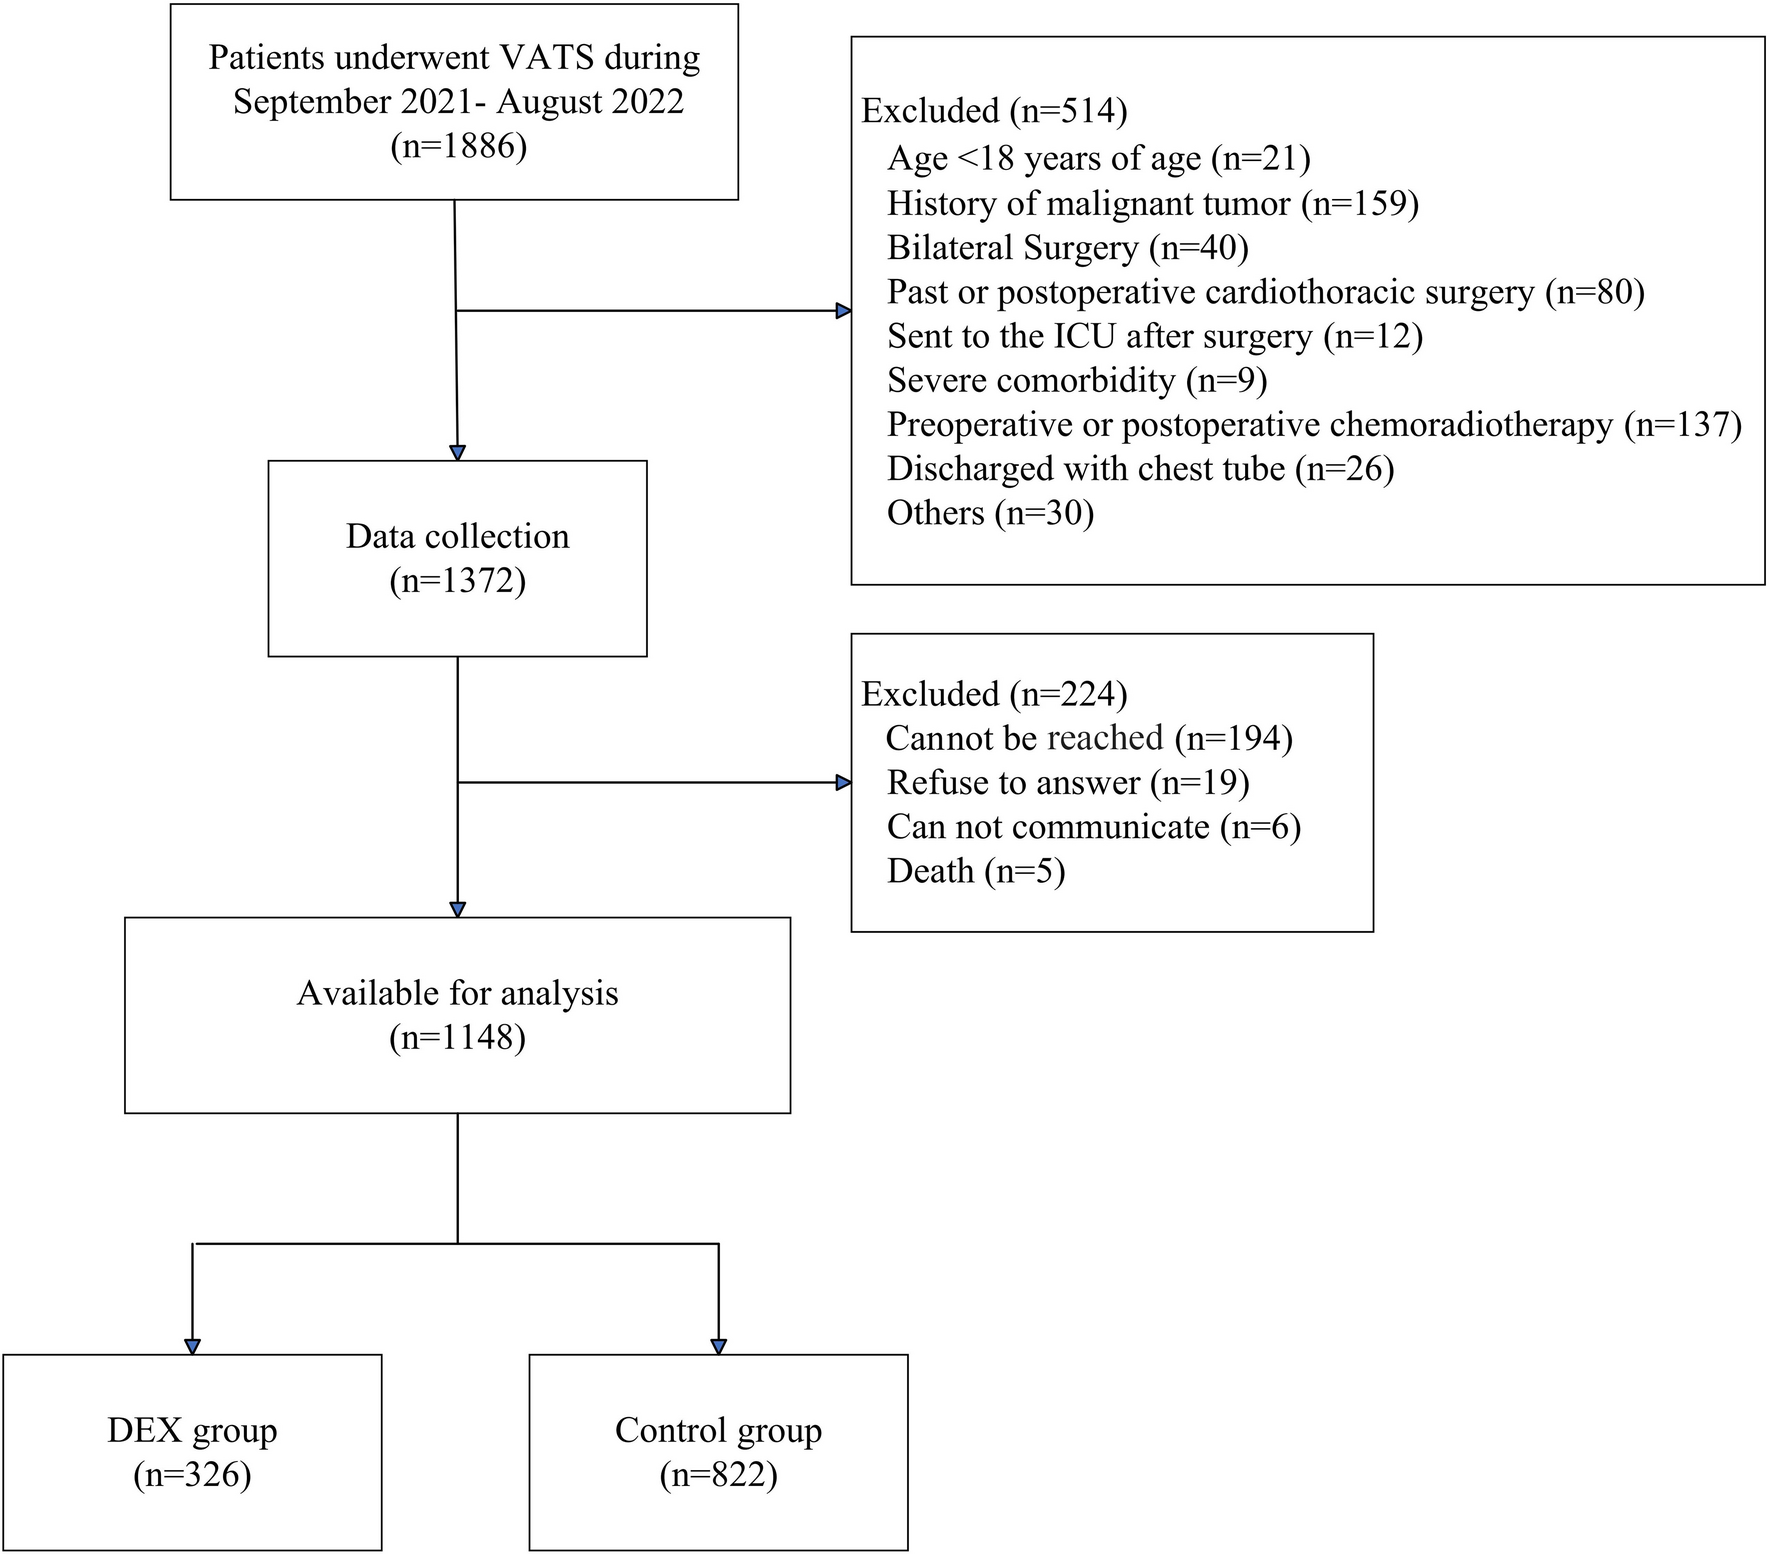 Postoperative Dexmedetomidine Infusion and Chronic Postsurgical Pain in Thoracoscopic Pulmonary Nodule Surgery: A Retrospective Study with Propensity-Score-Matched Analysis